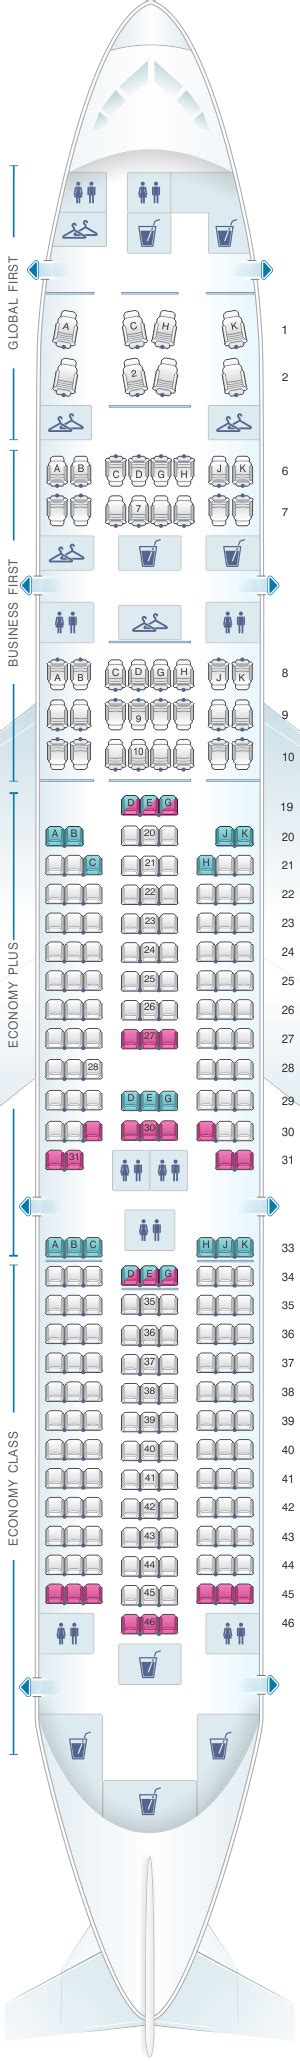 United airlines seating chart 777-200. Detailed seat map United Airlines Boeing B757 200 (752) - version 1. Find the best airplanes seats, information on legroom, recline and in-flight entertainment using our detailed online seating charts. 